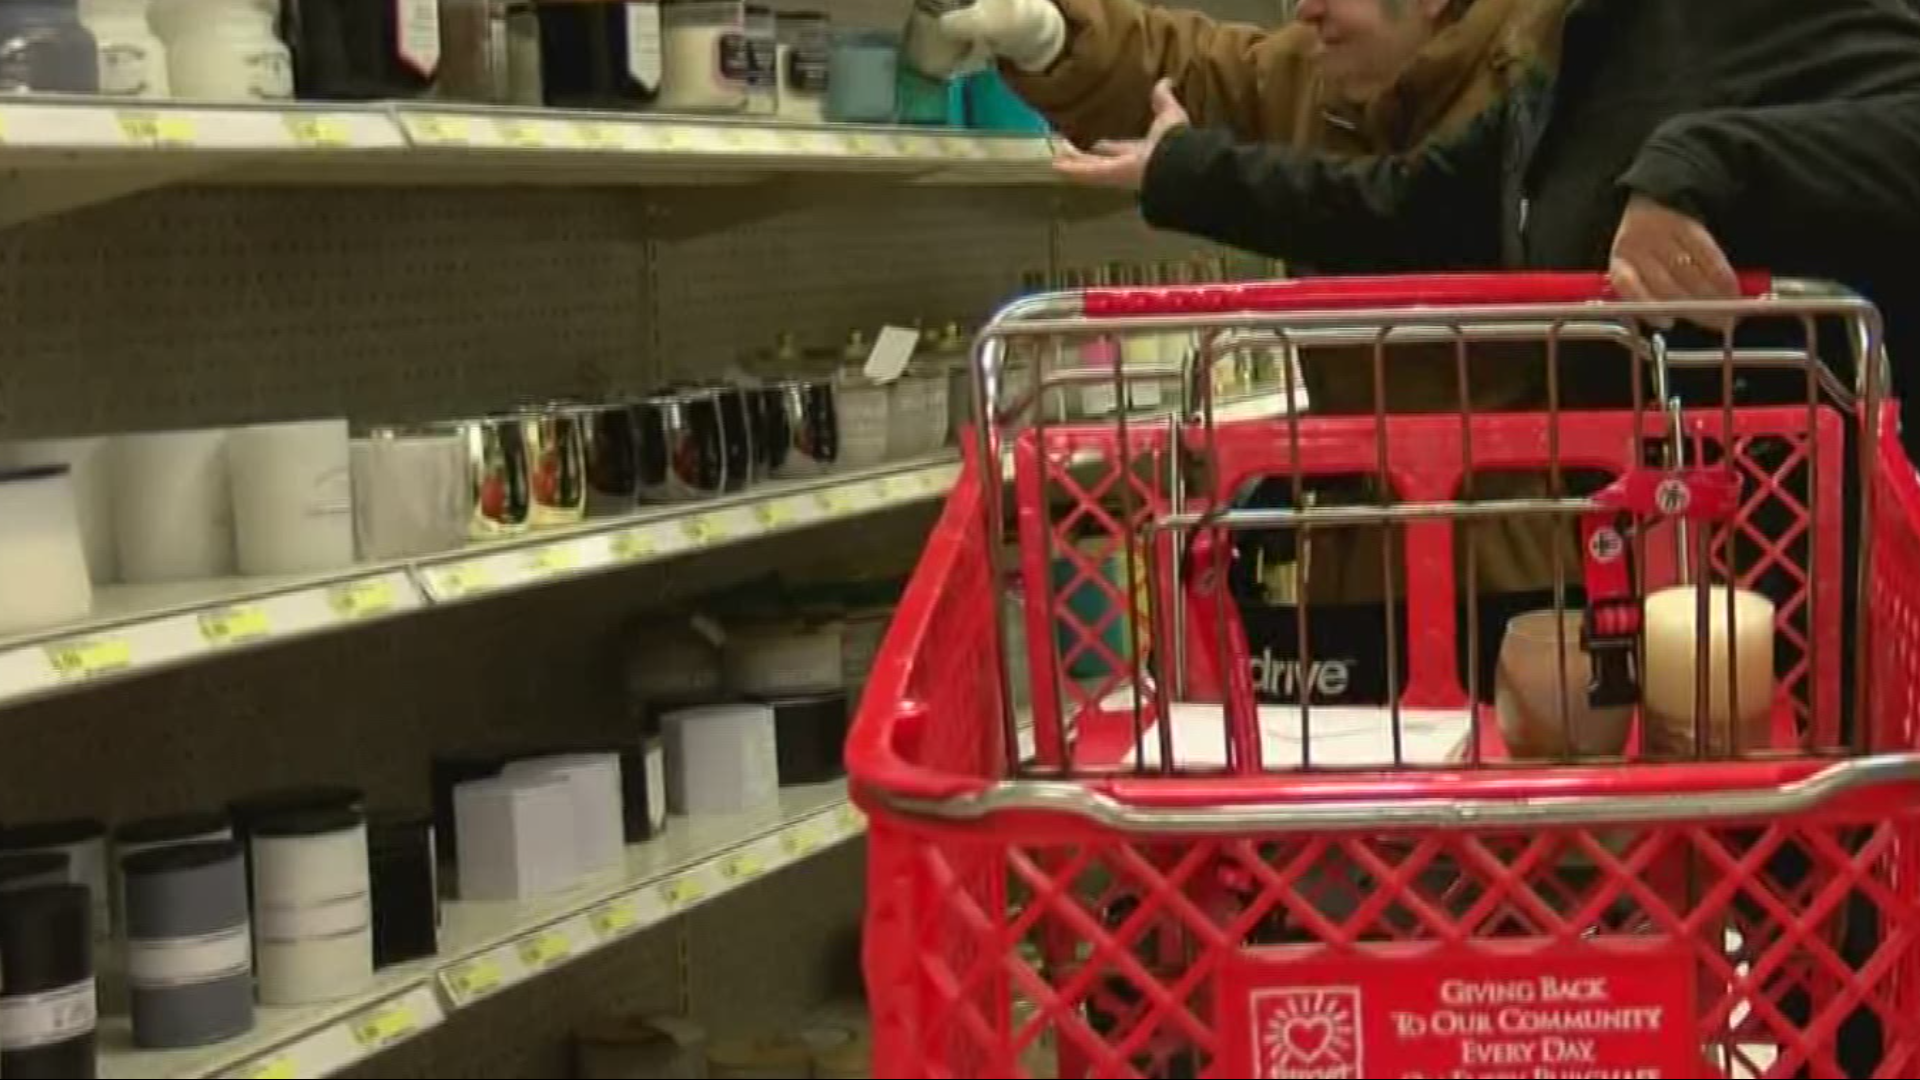 Target opened stores one hour early Wednesday for those who are on the autism spectrum.